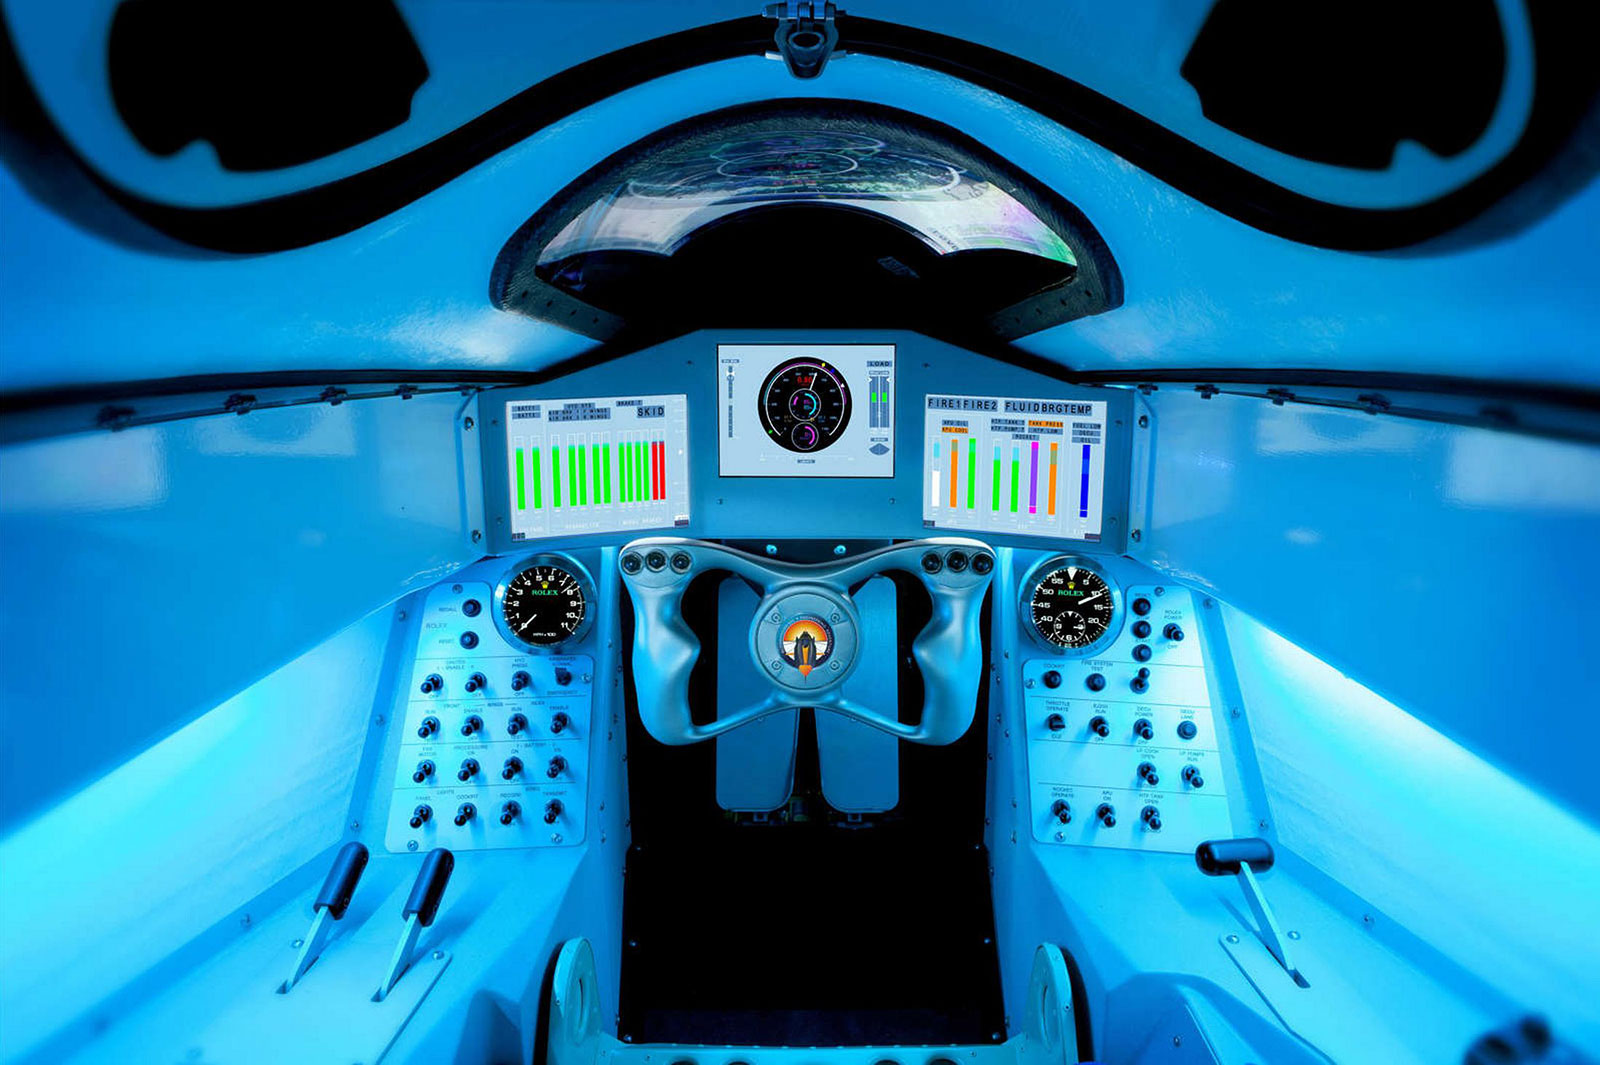 The new cockpit interior of the Bloodhound SSC, the British rocket and jet-powered supersonic car. It will attempt to reach a speed of 1000mph in a South African desert